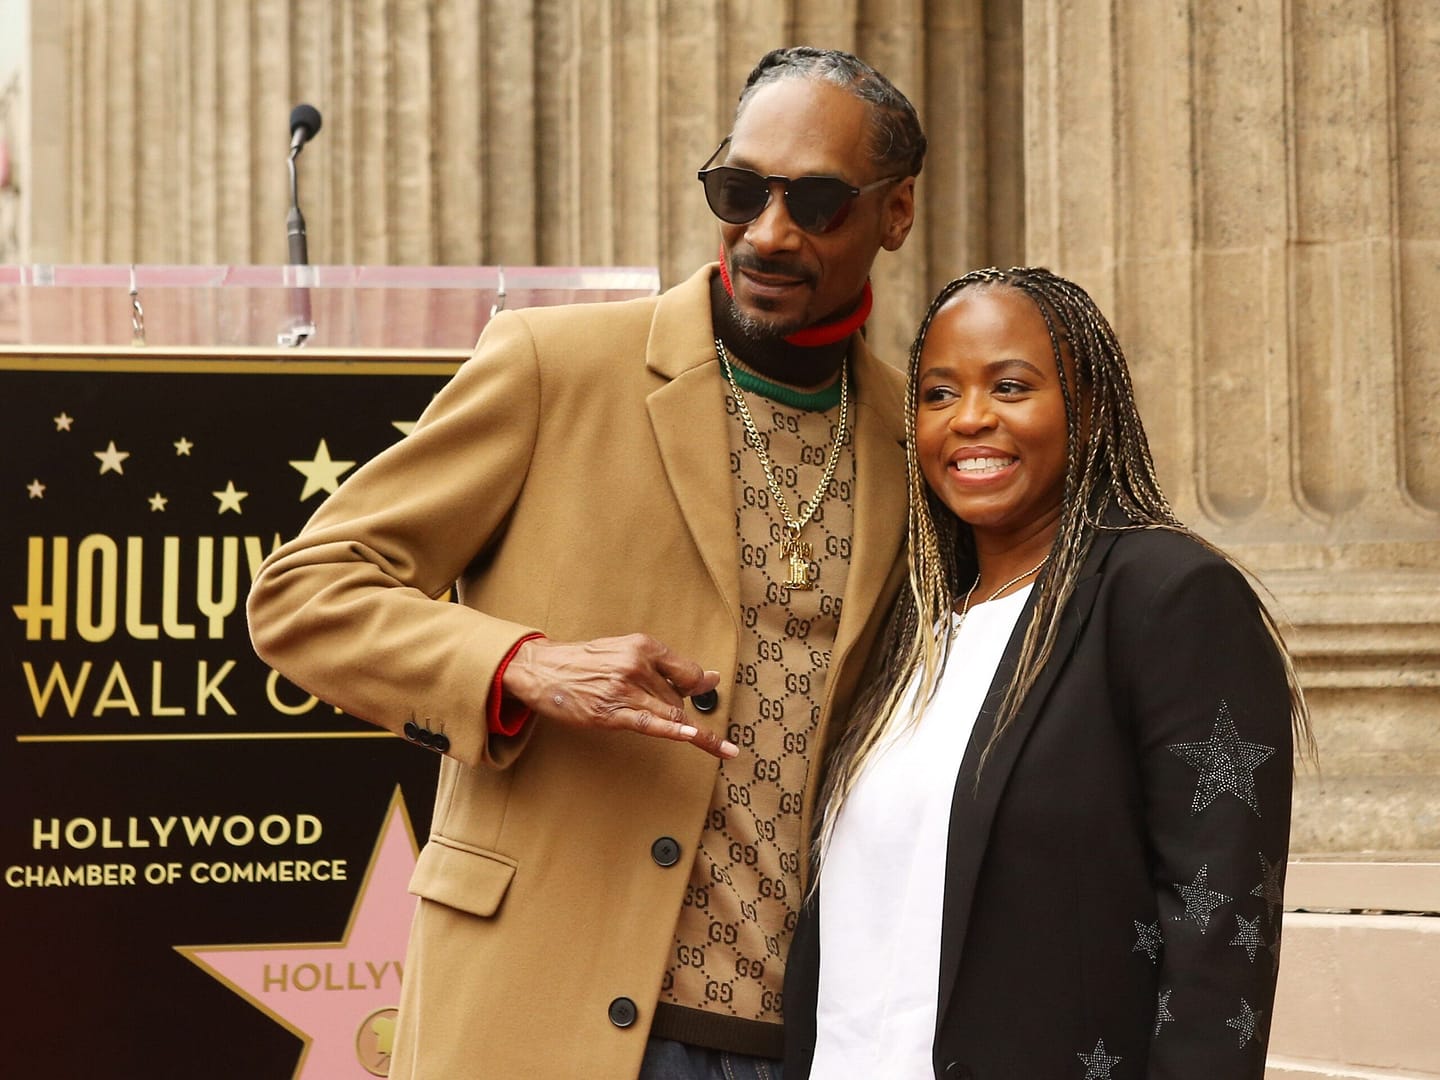 snoop-dogg-says-he-turned-down-a-$100-million-onlyfans-deal-because-his-wife-wouldn’t-let-him-‘pull-that-thang-out’